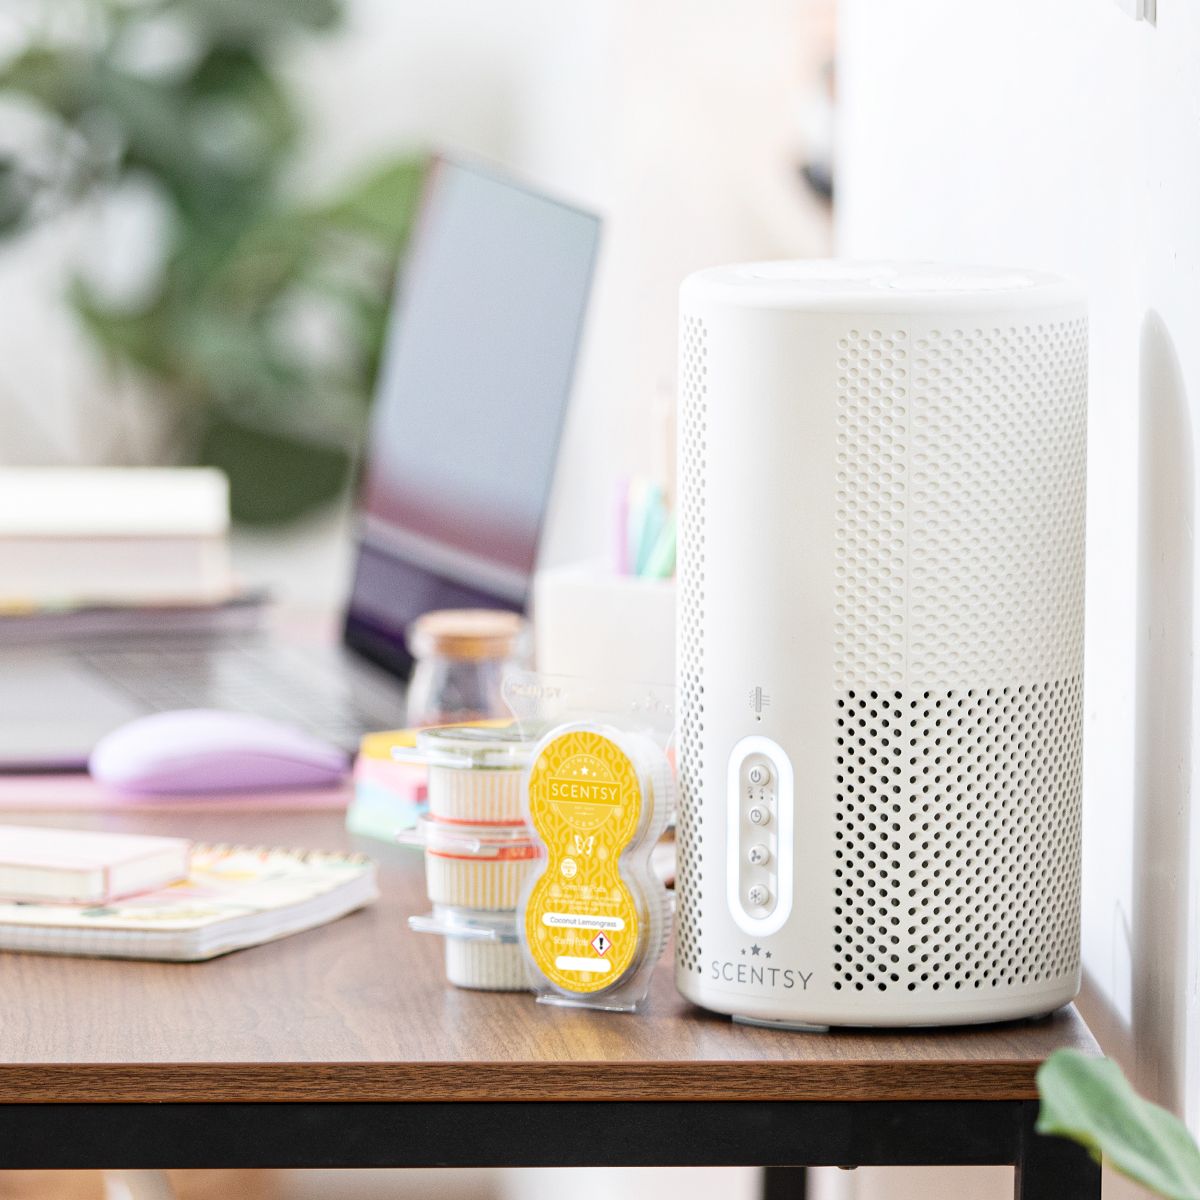 Scentsy Air Purifier and pods